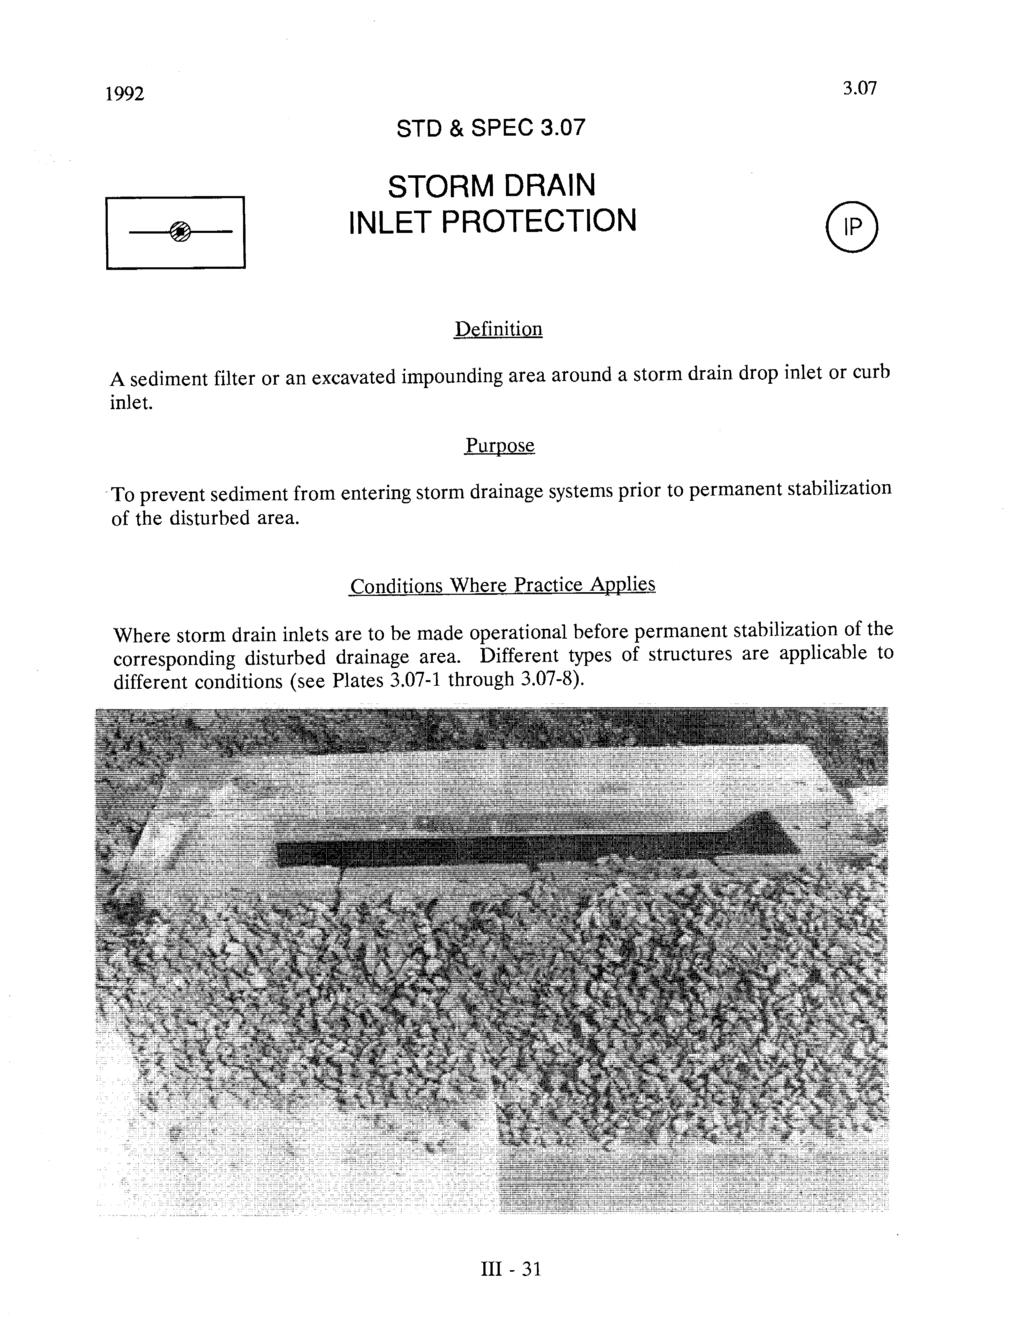 1992 STD & SPEC 3.7 STORM DRAIN INLET PROTECTION 3.7 Definition A sediment filter or an excavated impounding area around a storm drain drop inlet or curb inlet.